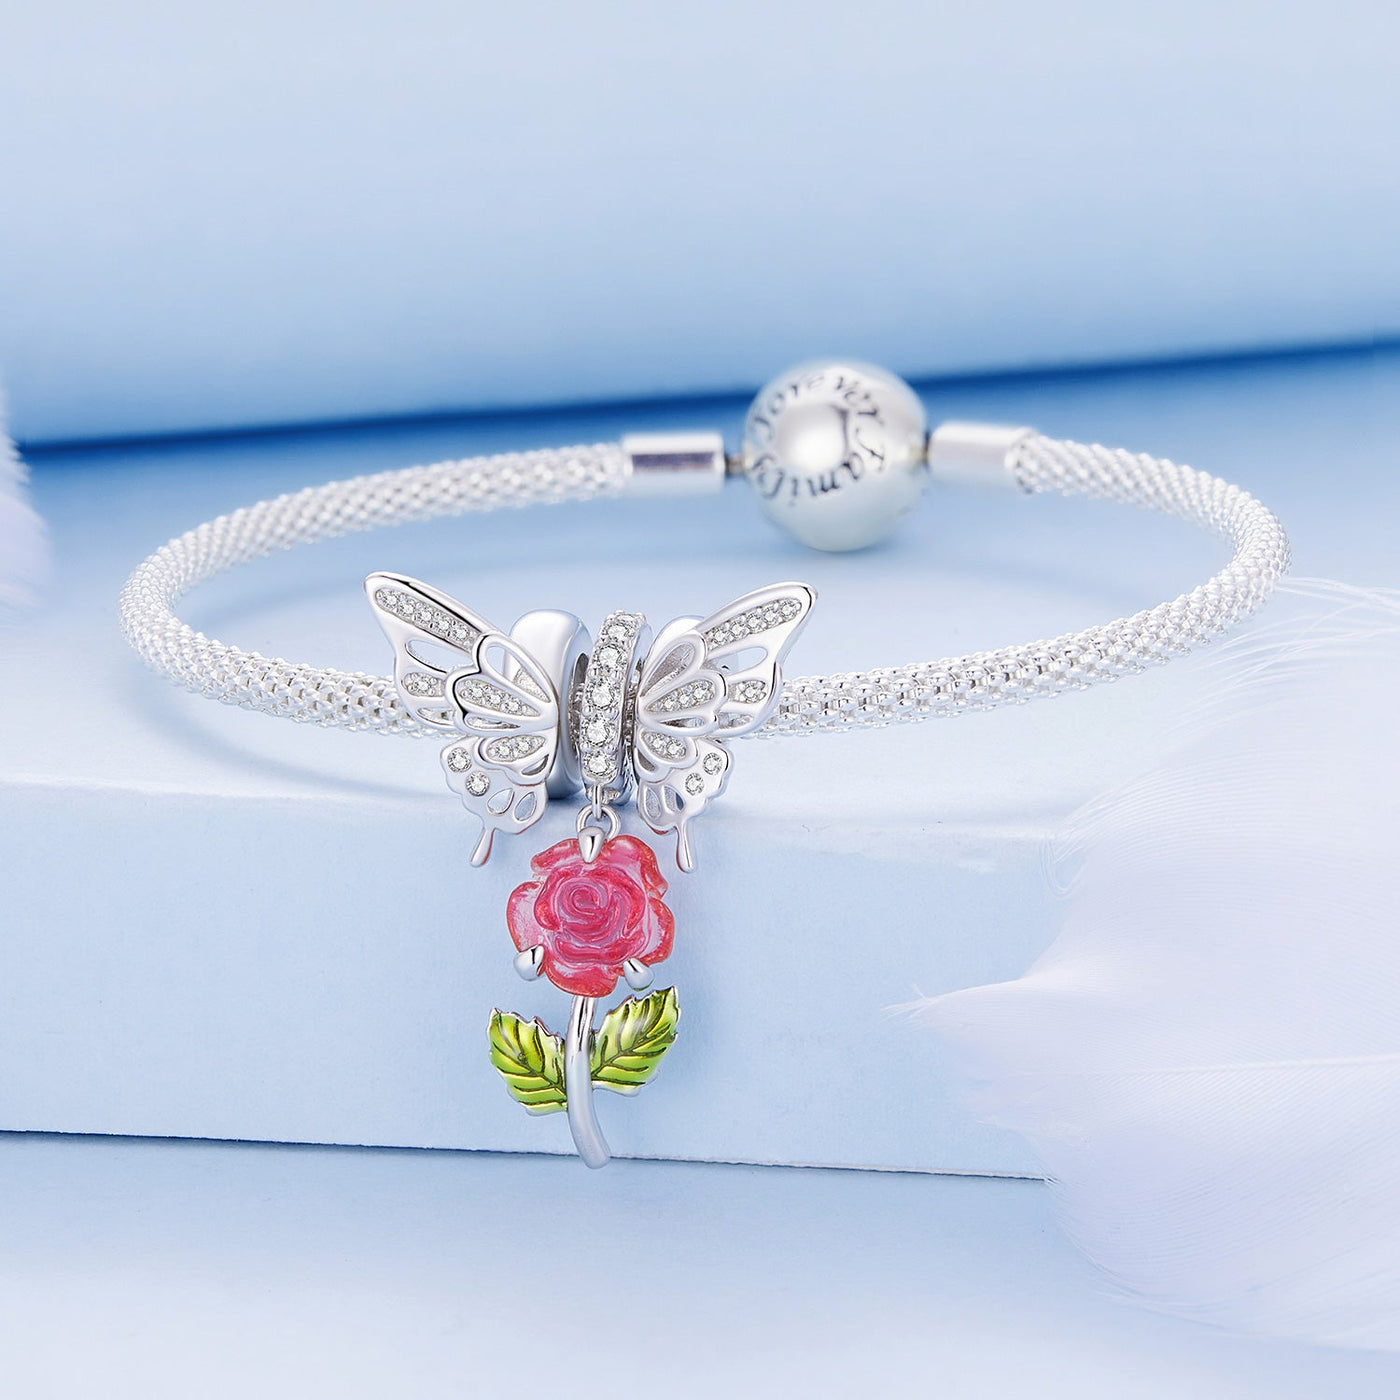 Colour Changing Rose Pendant Charm - The Silver Goose SA